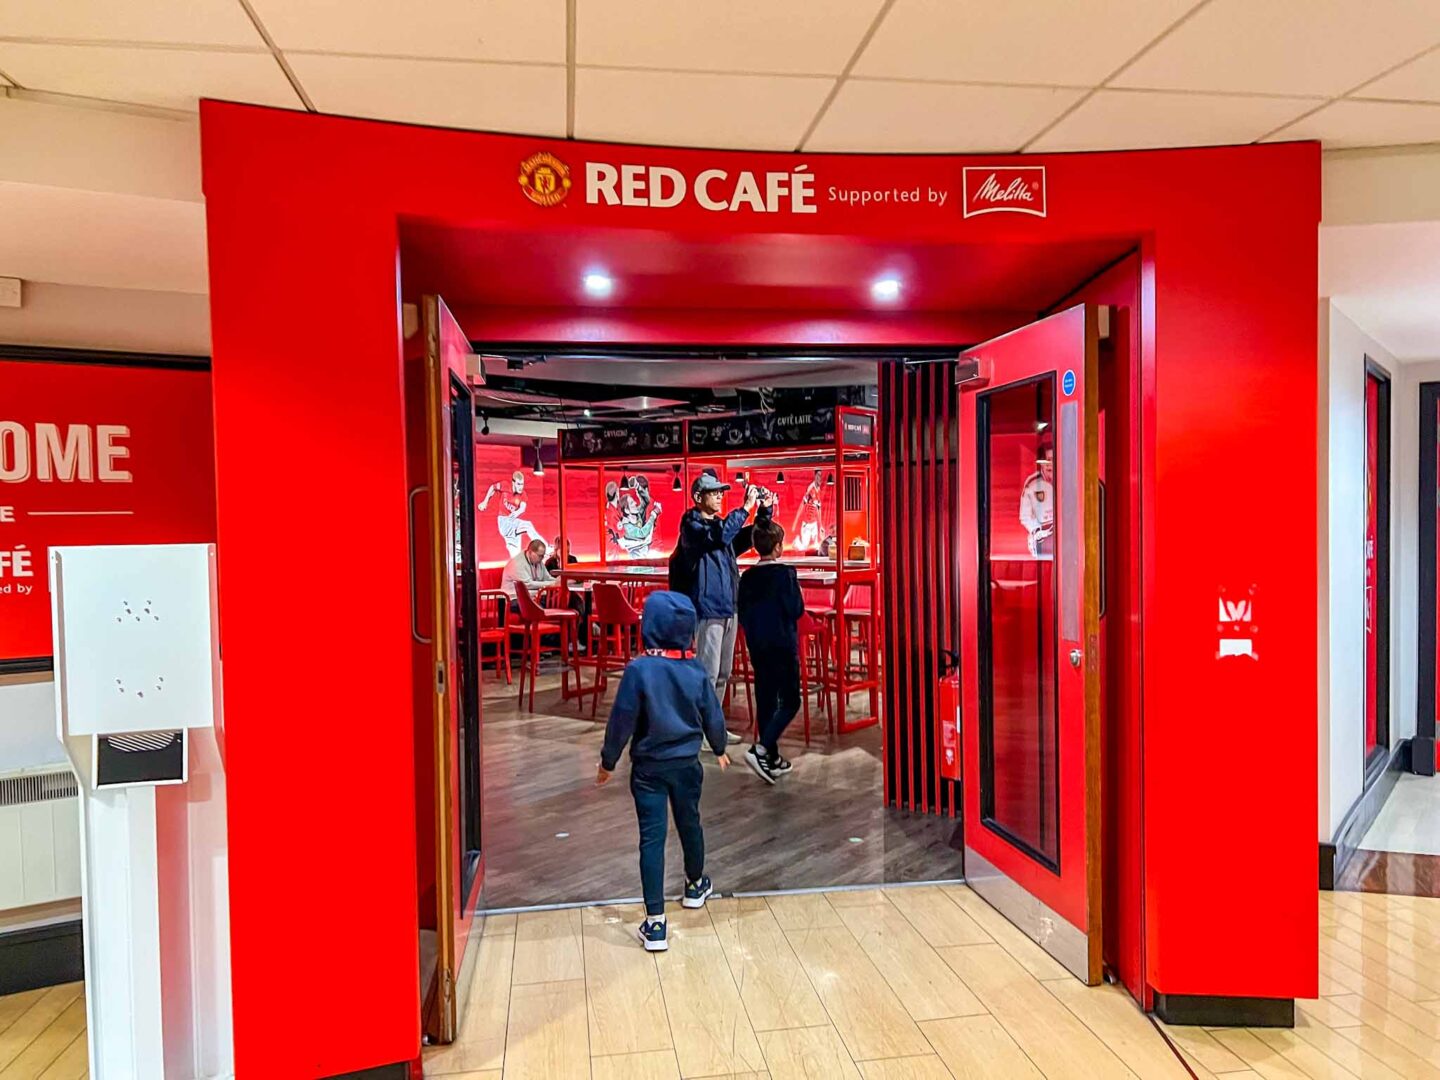 Red Cafe inside Manchester United Stadium, Family Days Out in Manchester, Manchester with kids,